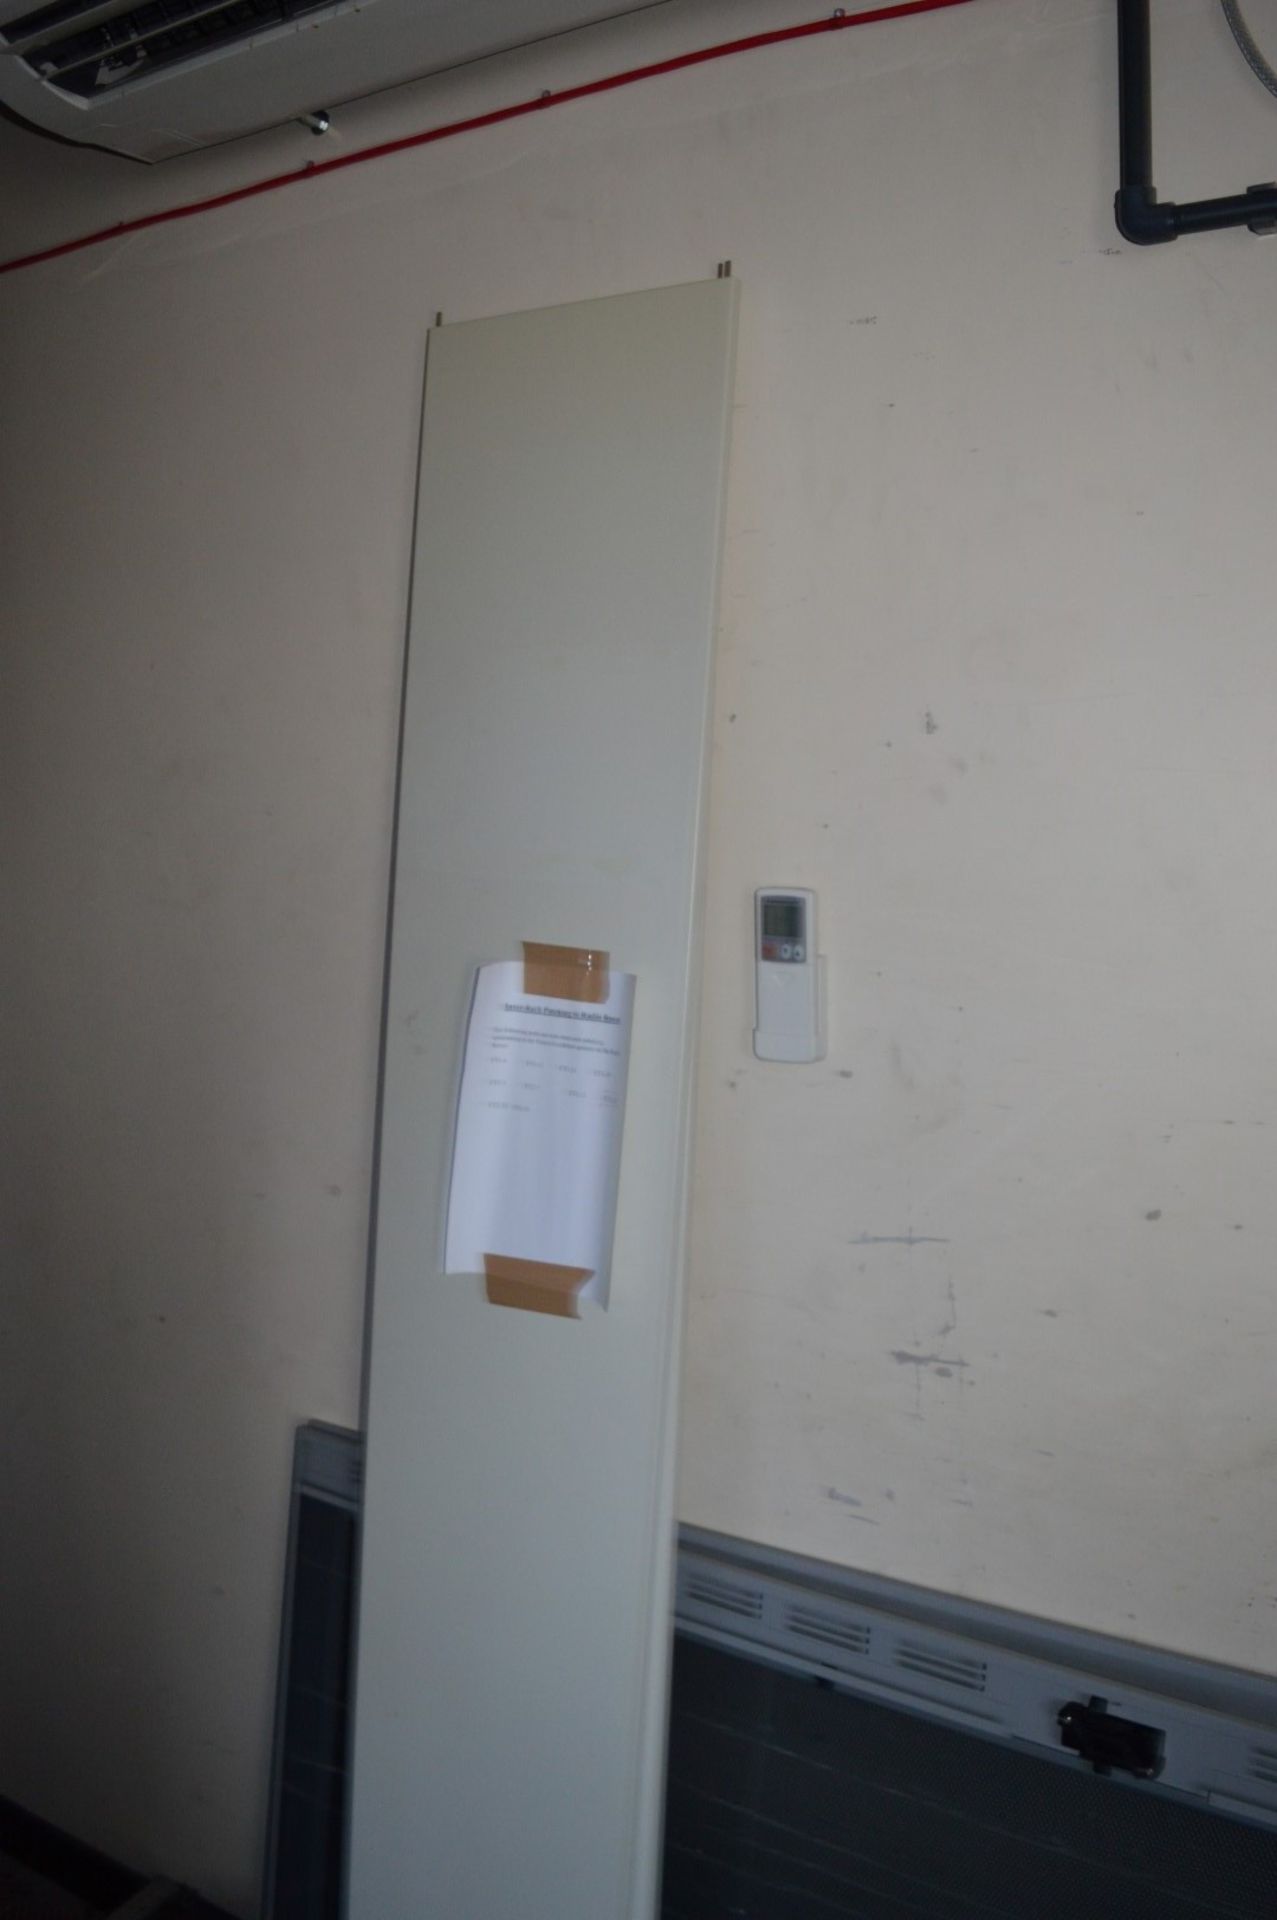 1 x Cooper B Line Access Server Cabinet Enclosure - Appears Complete In Very Good Condition - H210 x - Image 3 of 10